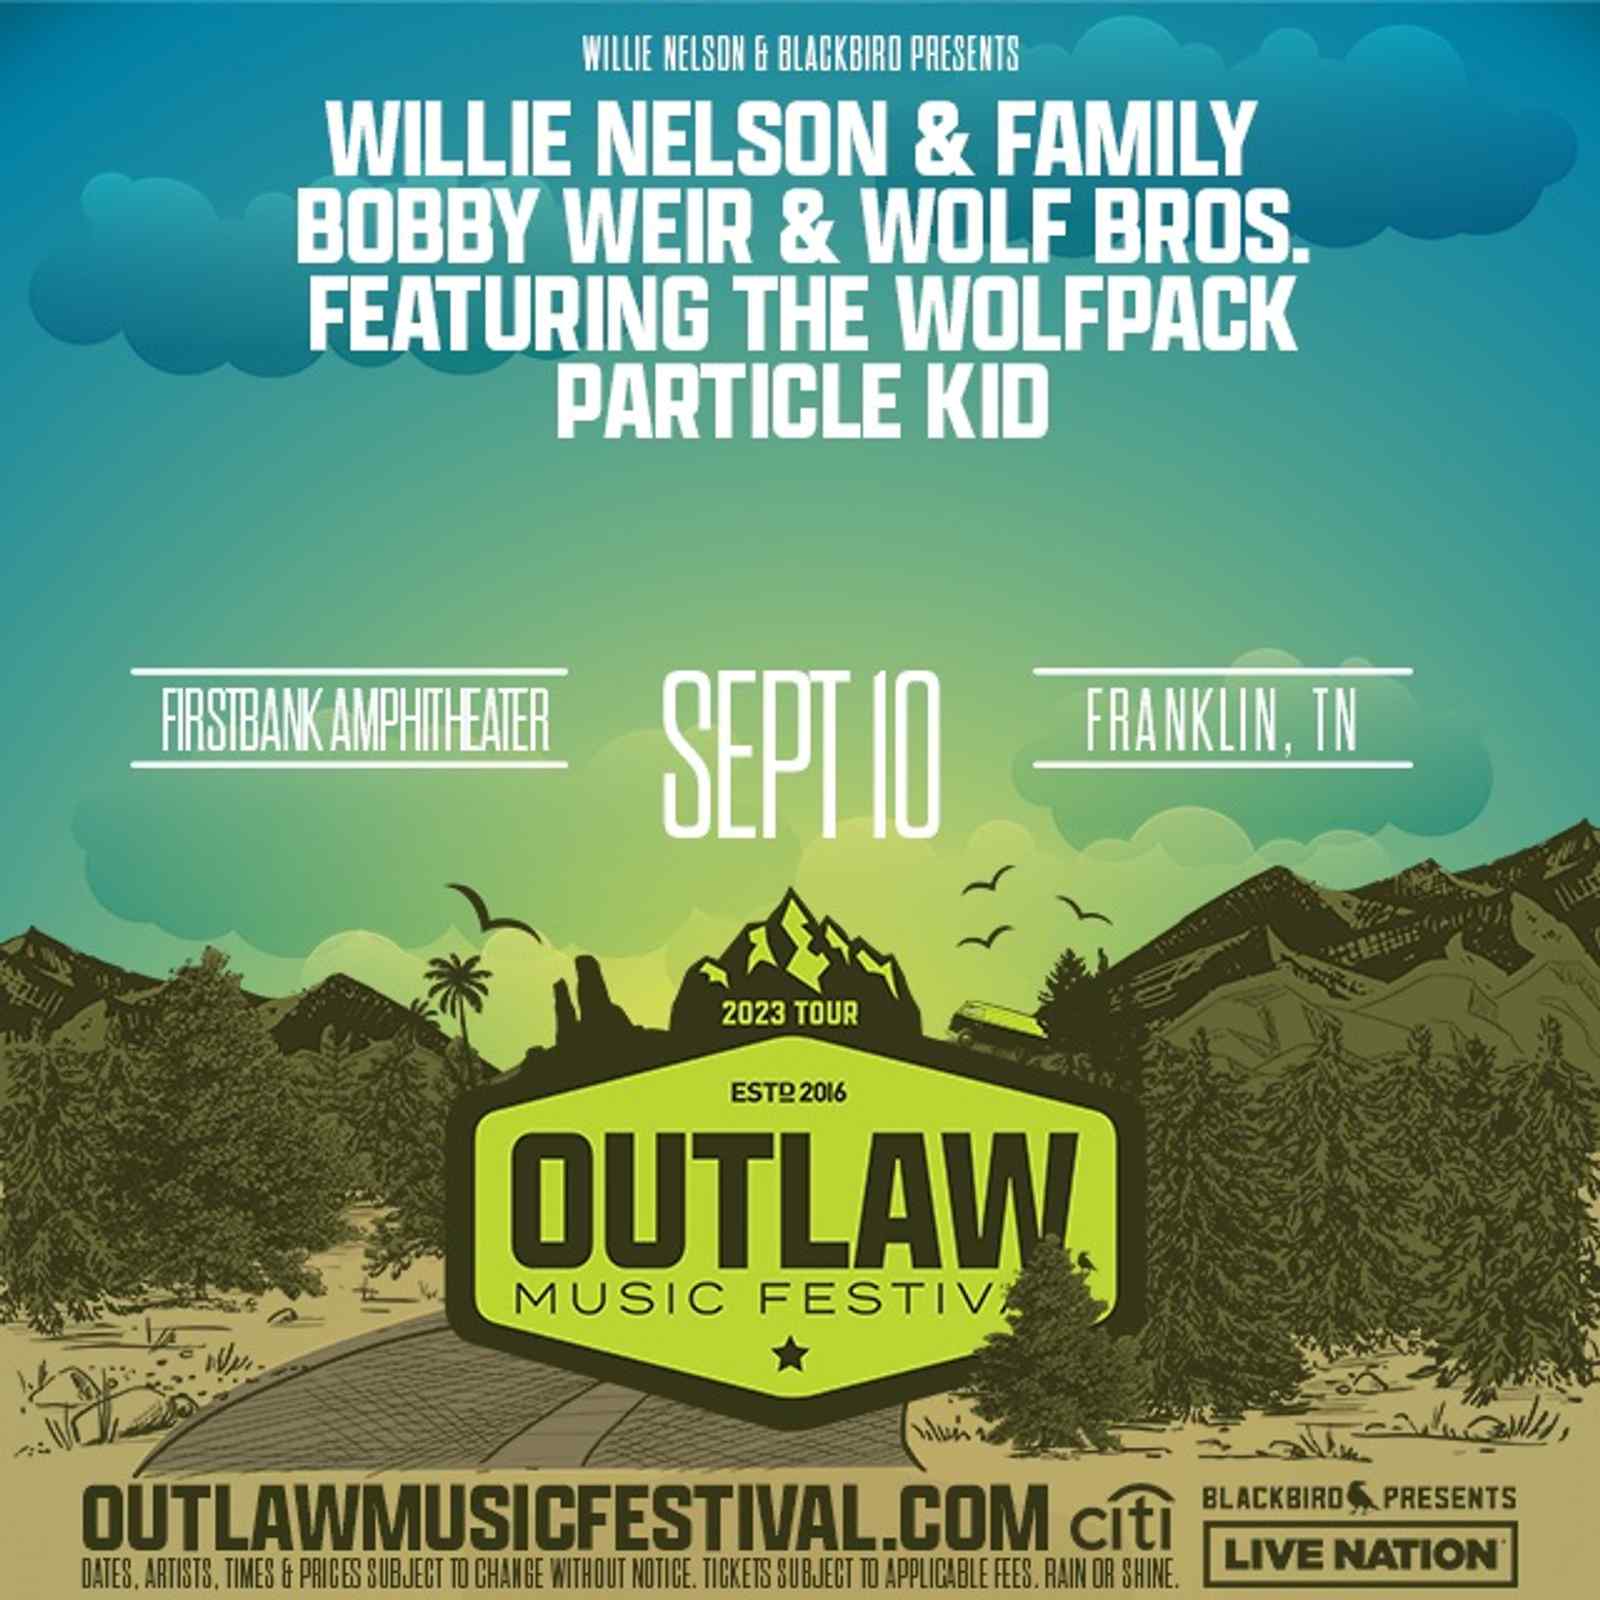 Outaw Music Festival featuring Willie Nelson& Family with special guests Bobby Weir and Wolf Bros. featuring The Wolfpack and Particle Kid